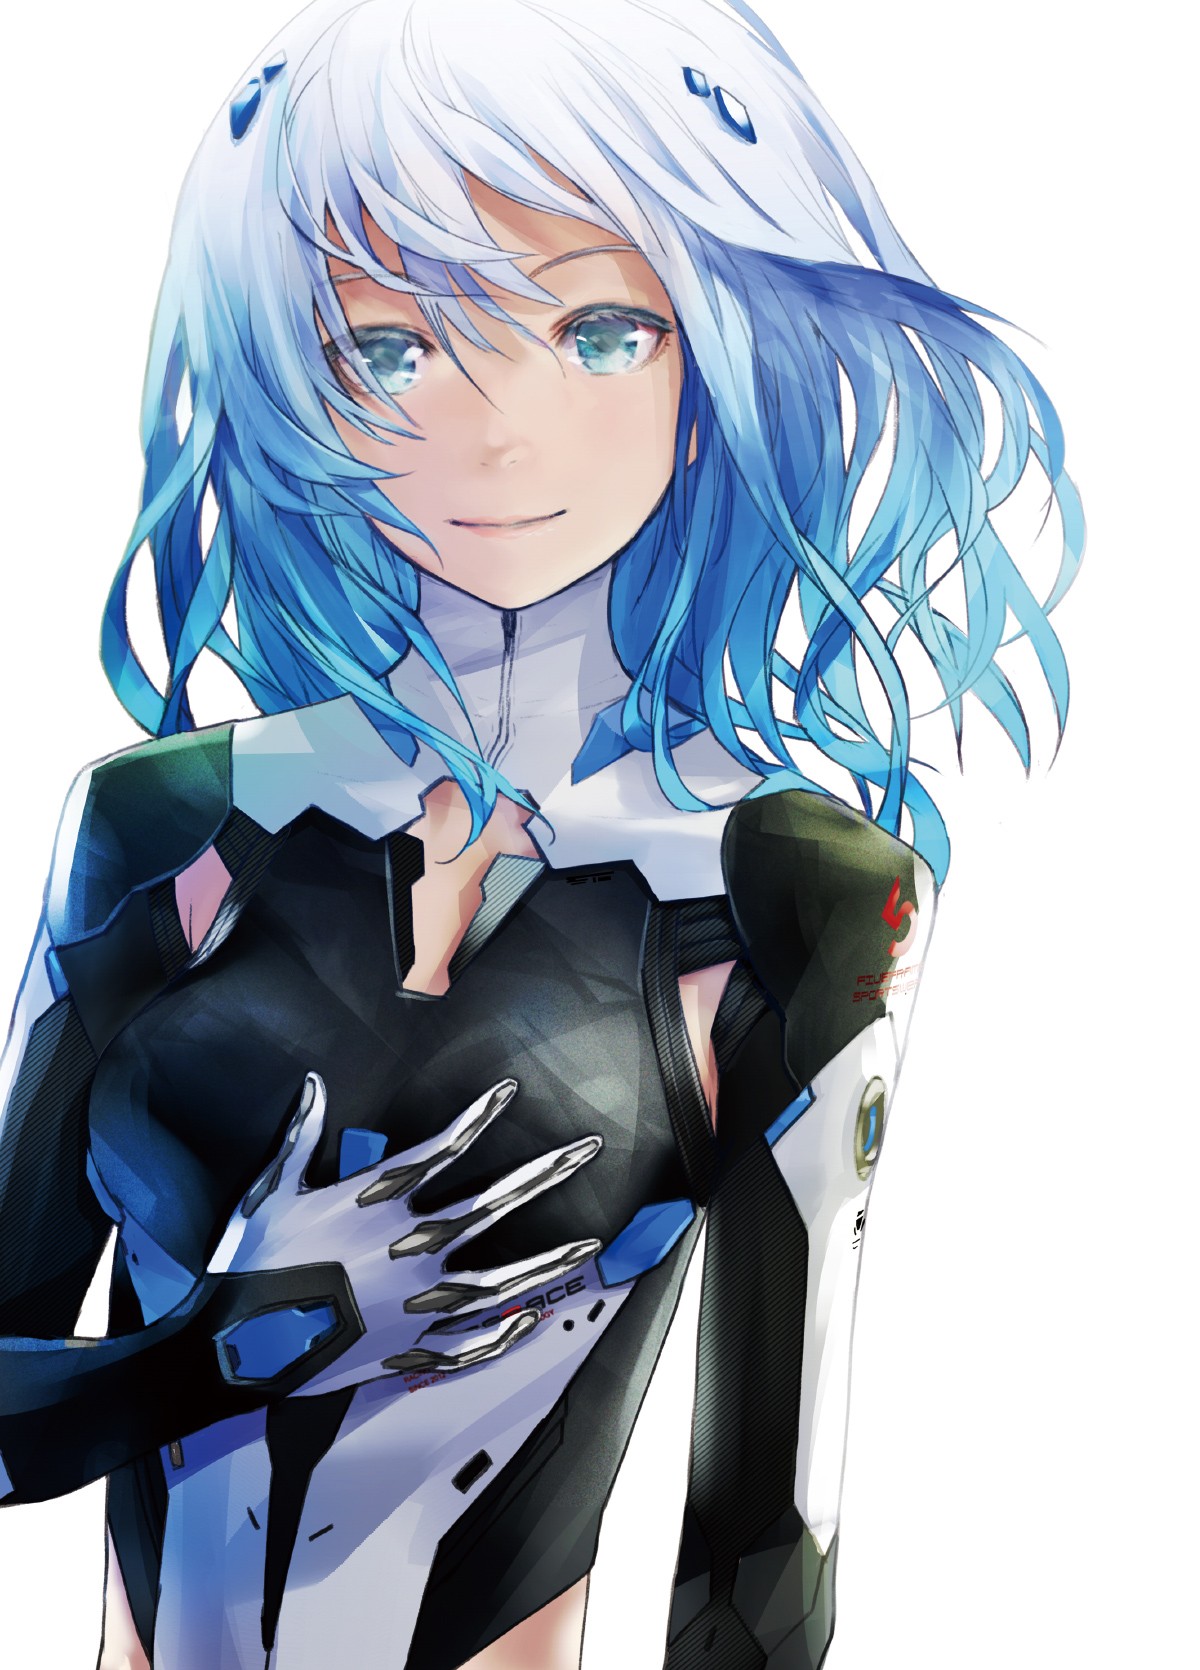 Beatless Lacia Androids Long Hair Blue Hair Blue Eyes Simple Background Anime Girls Anime Type 005 L 1200x1670